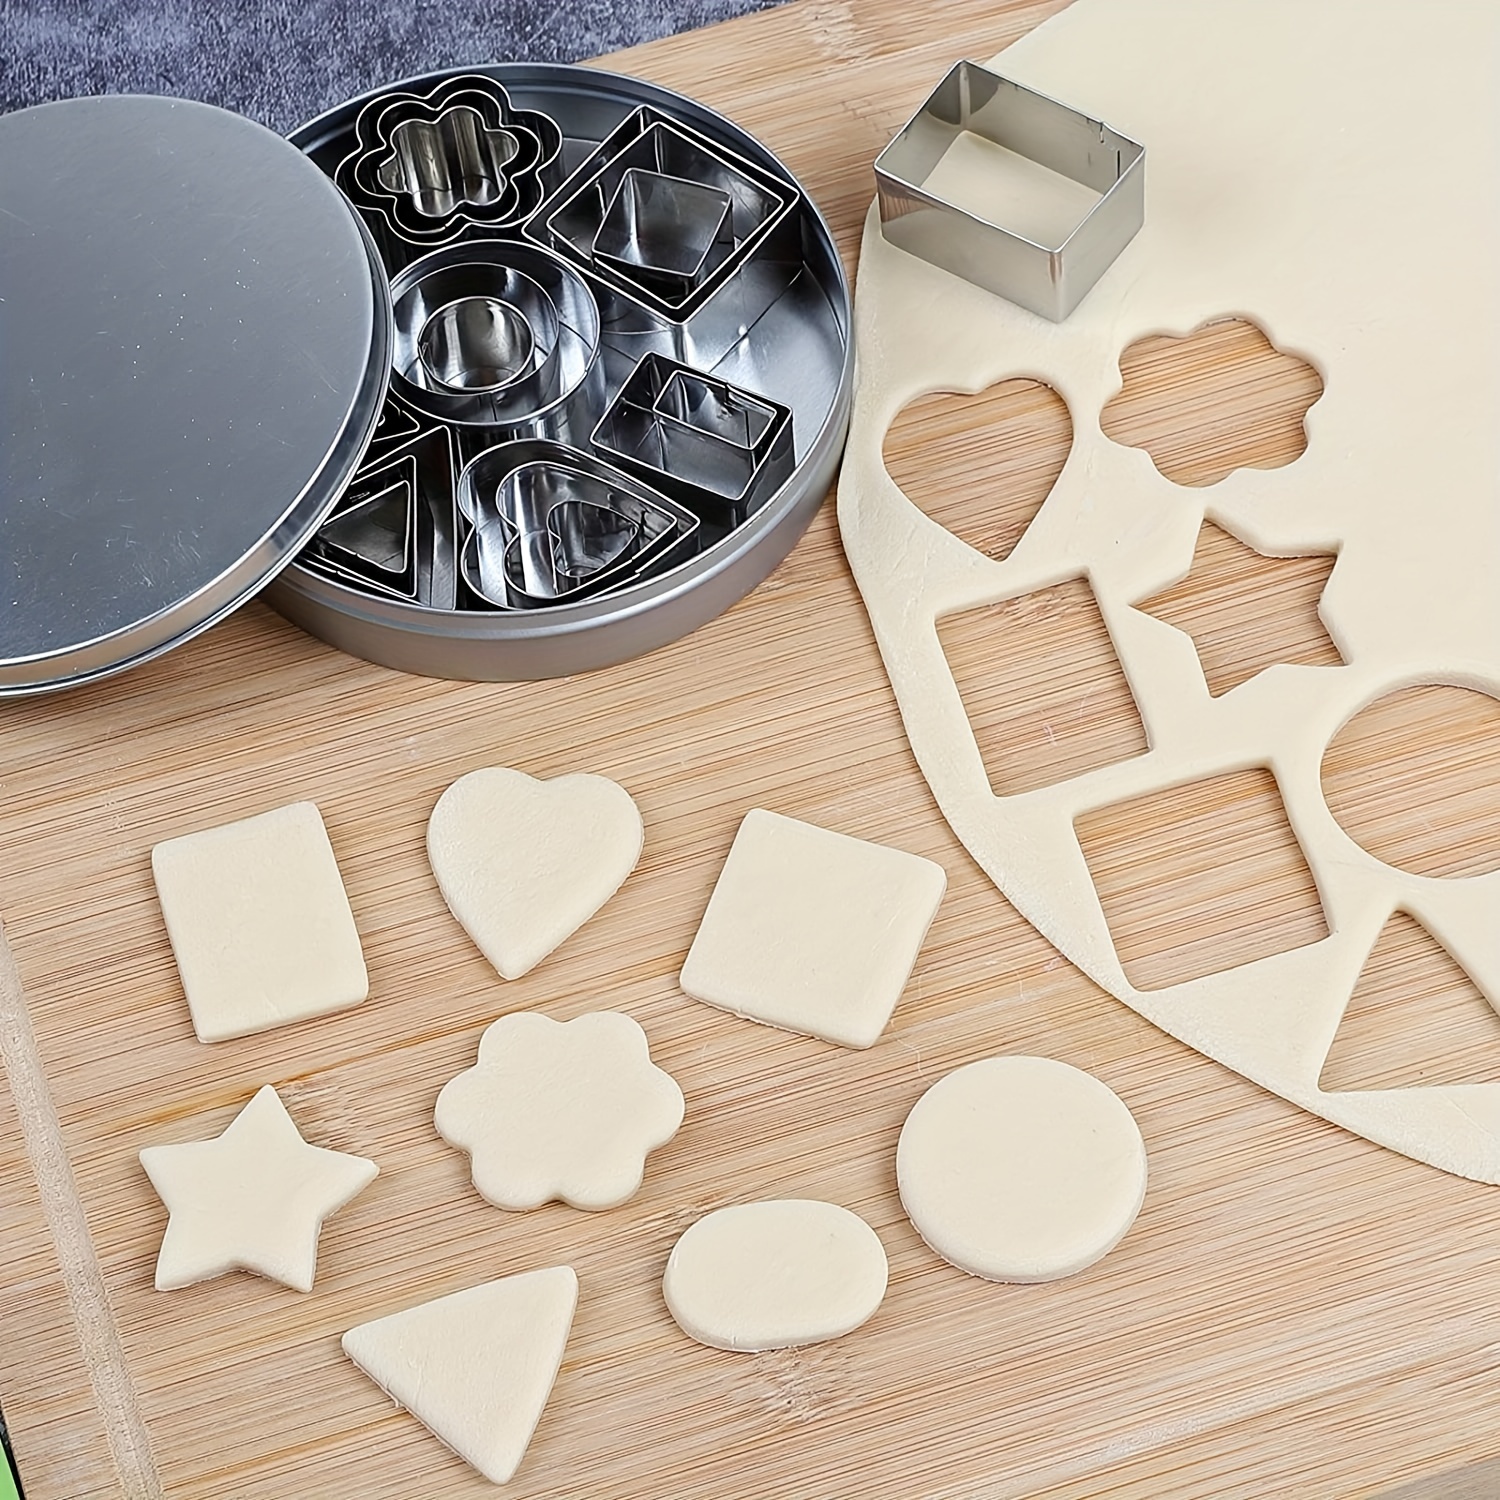 12Pcs Stainless Steel Cookie Cutters Shapes Baking Set Mold Cutters Baking  Tools